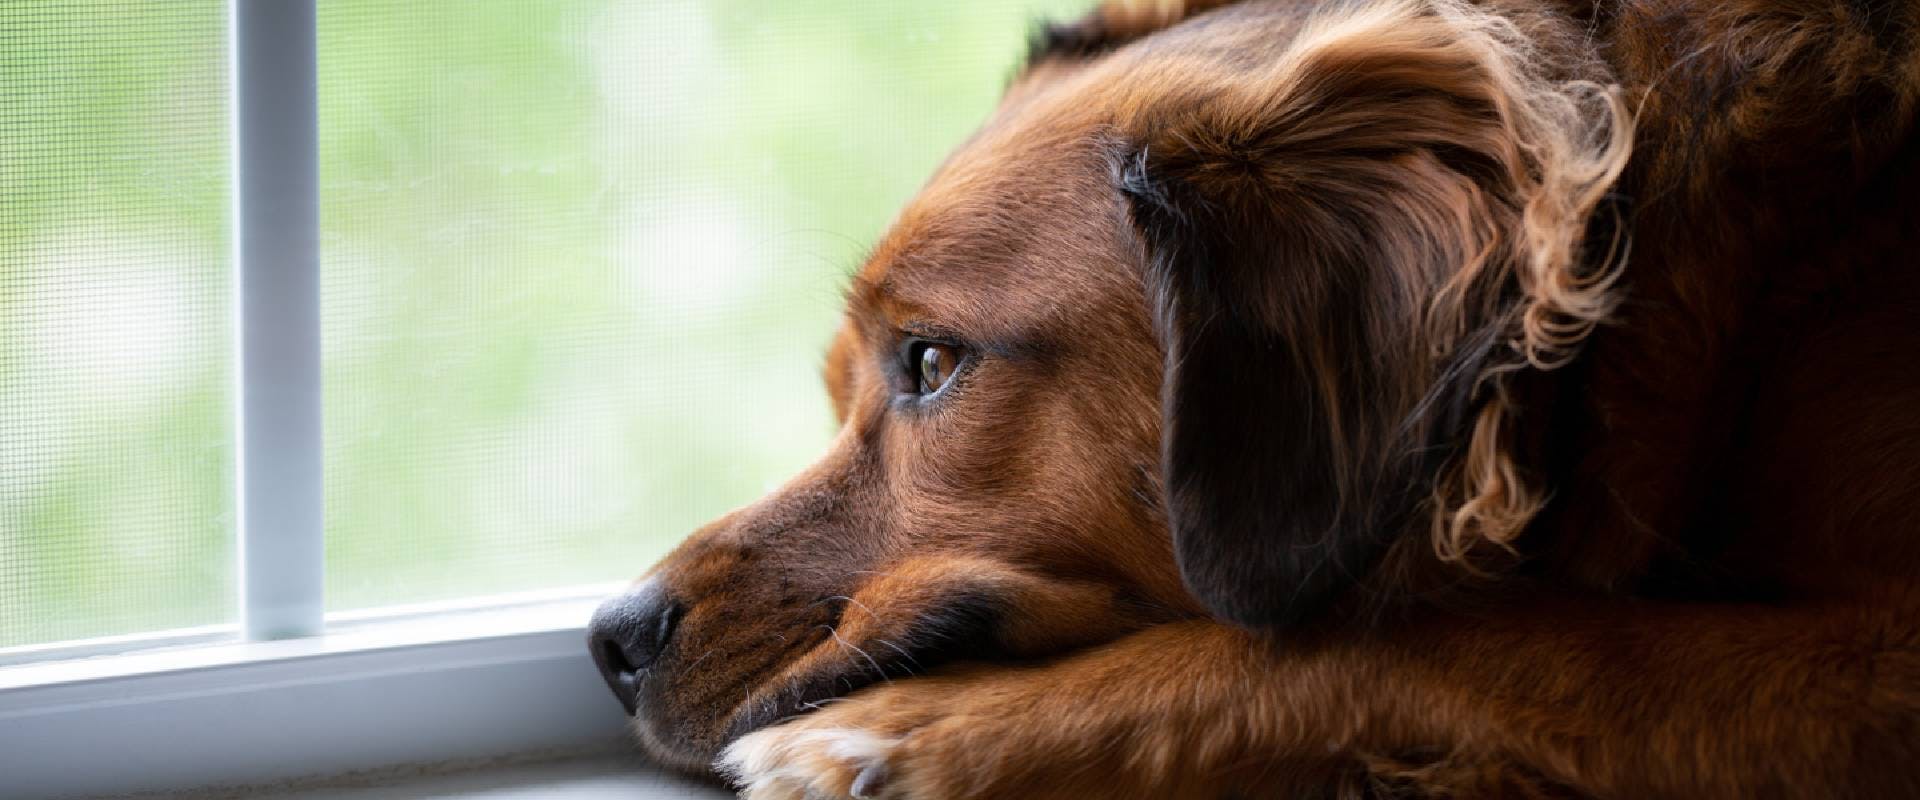 Sad dog looking out of a window